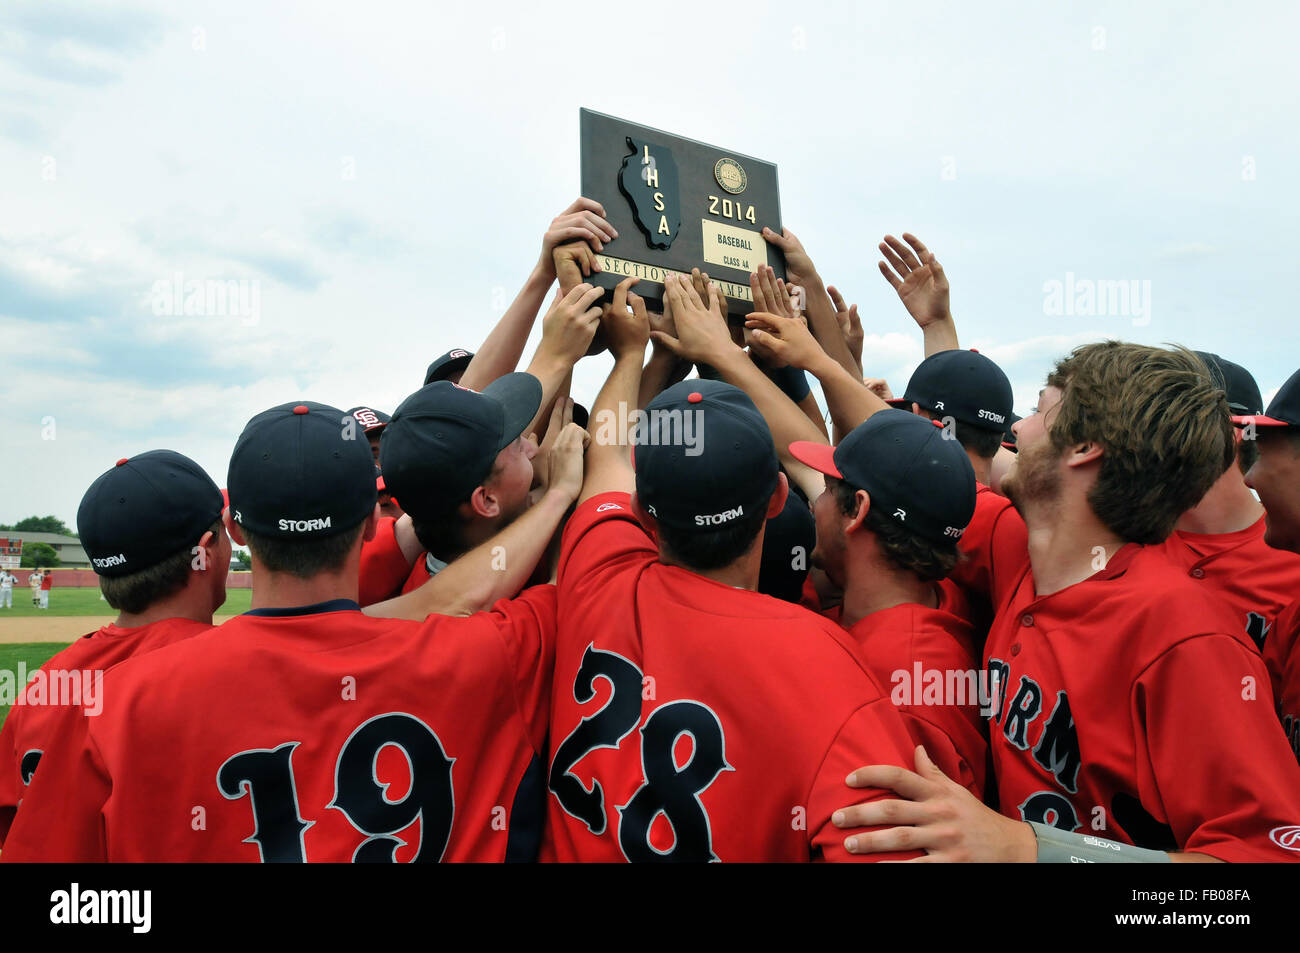 High school baseball team players surround the state sectional title plaque they had just earned on the field moments before. USA. Stock Photo